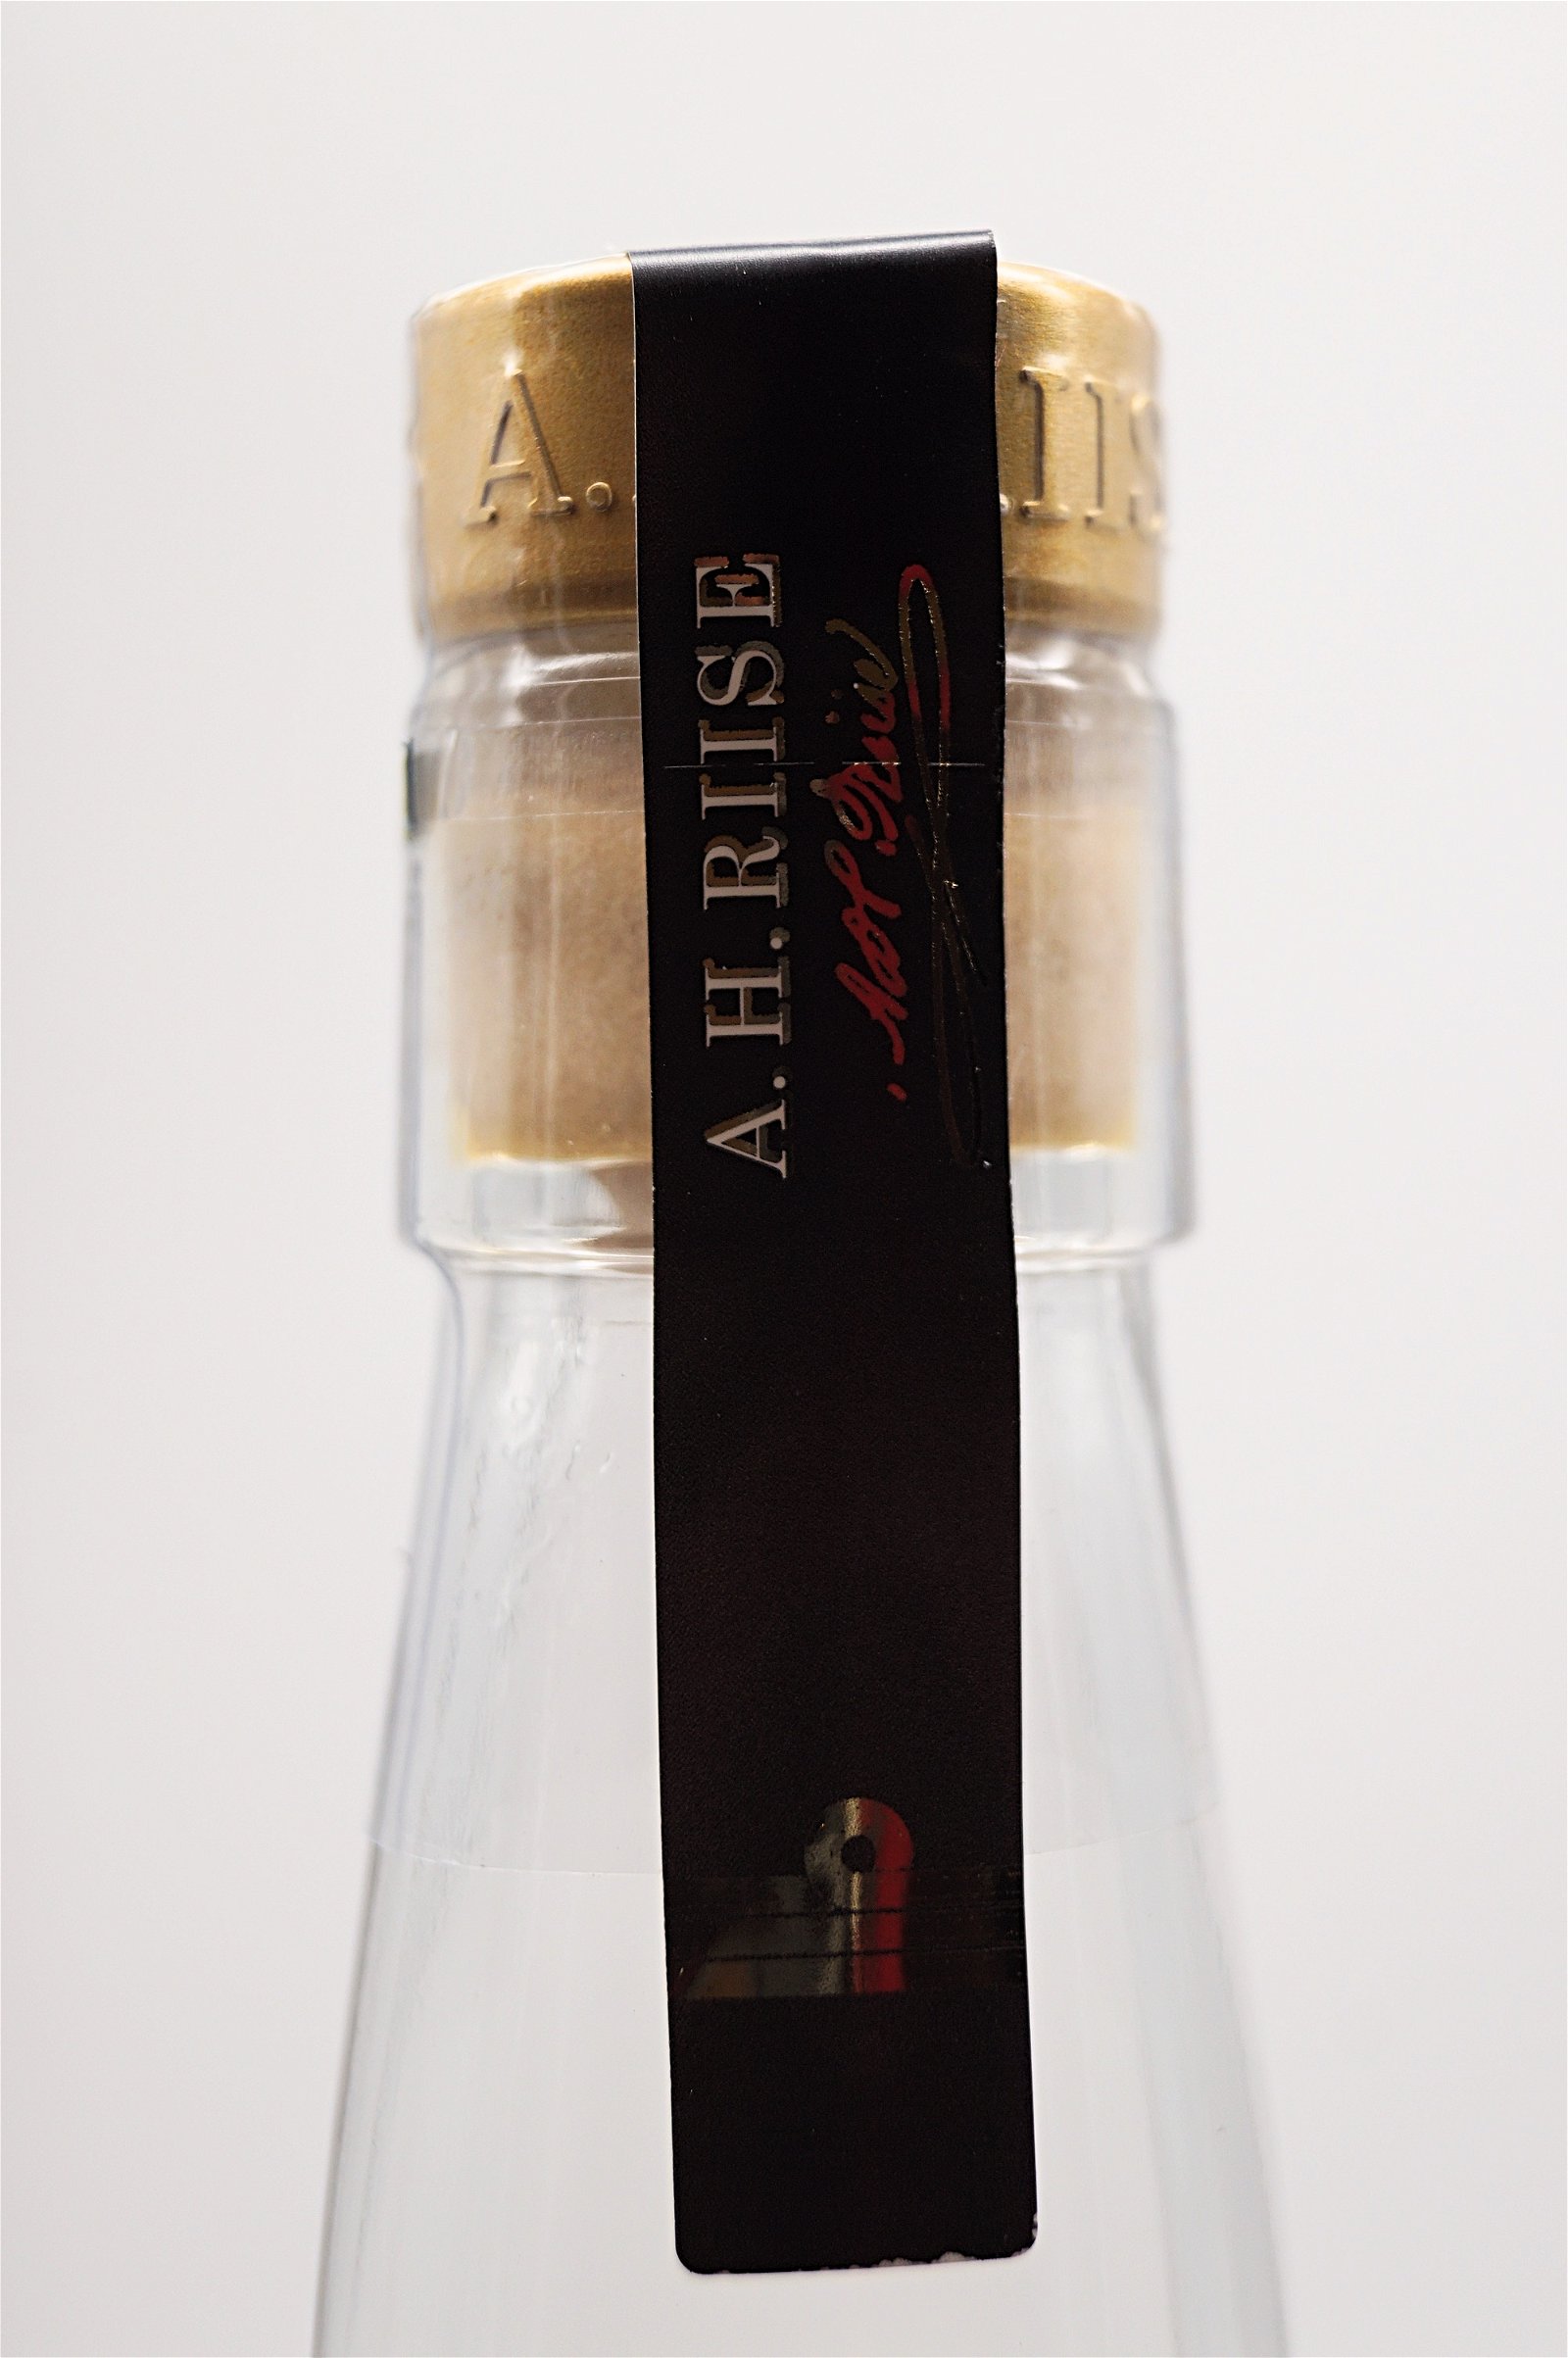 A.H.Riise Royal Danish Navy Strength Rum